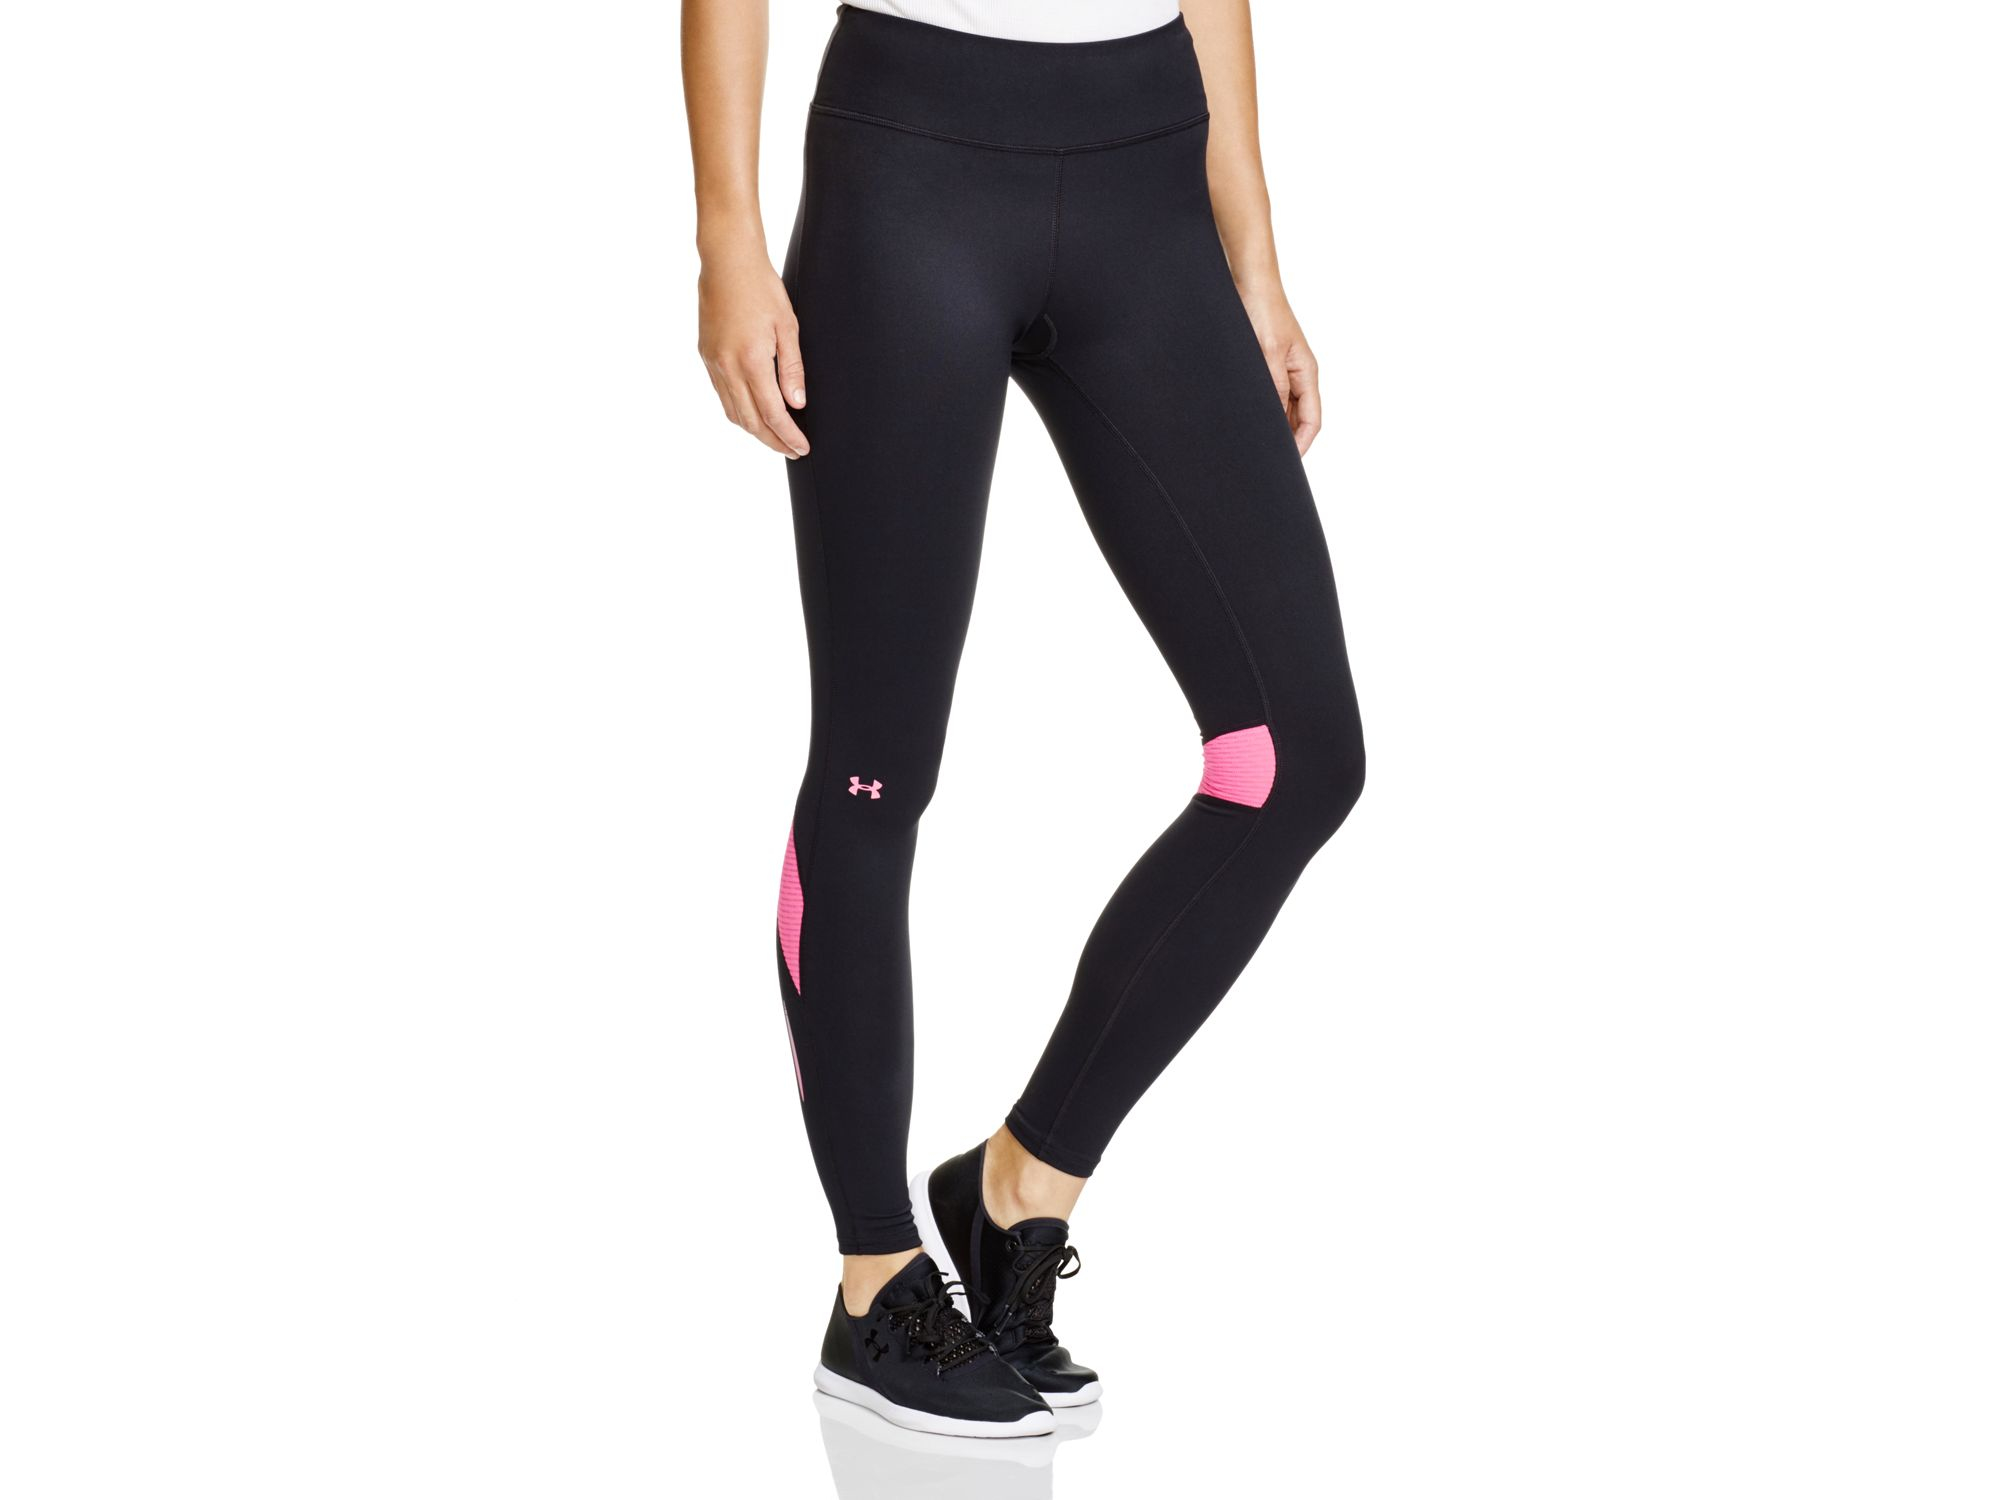 https://cdna.lystit.com/photos/01e6-2015/09/18/under-armour-blackpink-fly-by-compression-leggings-black-product-0-404058232-normal.jpeg